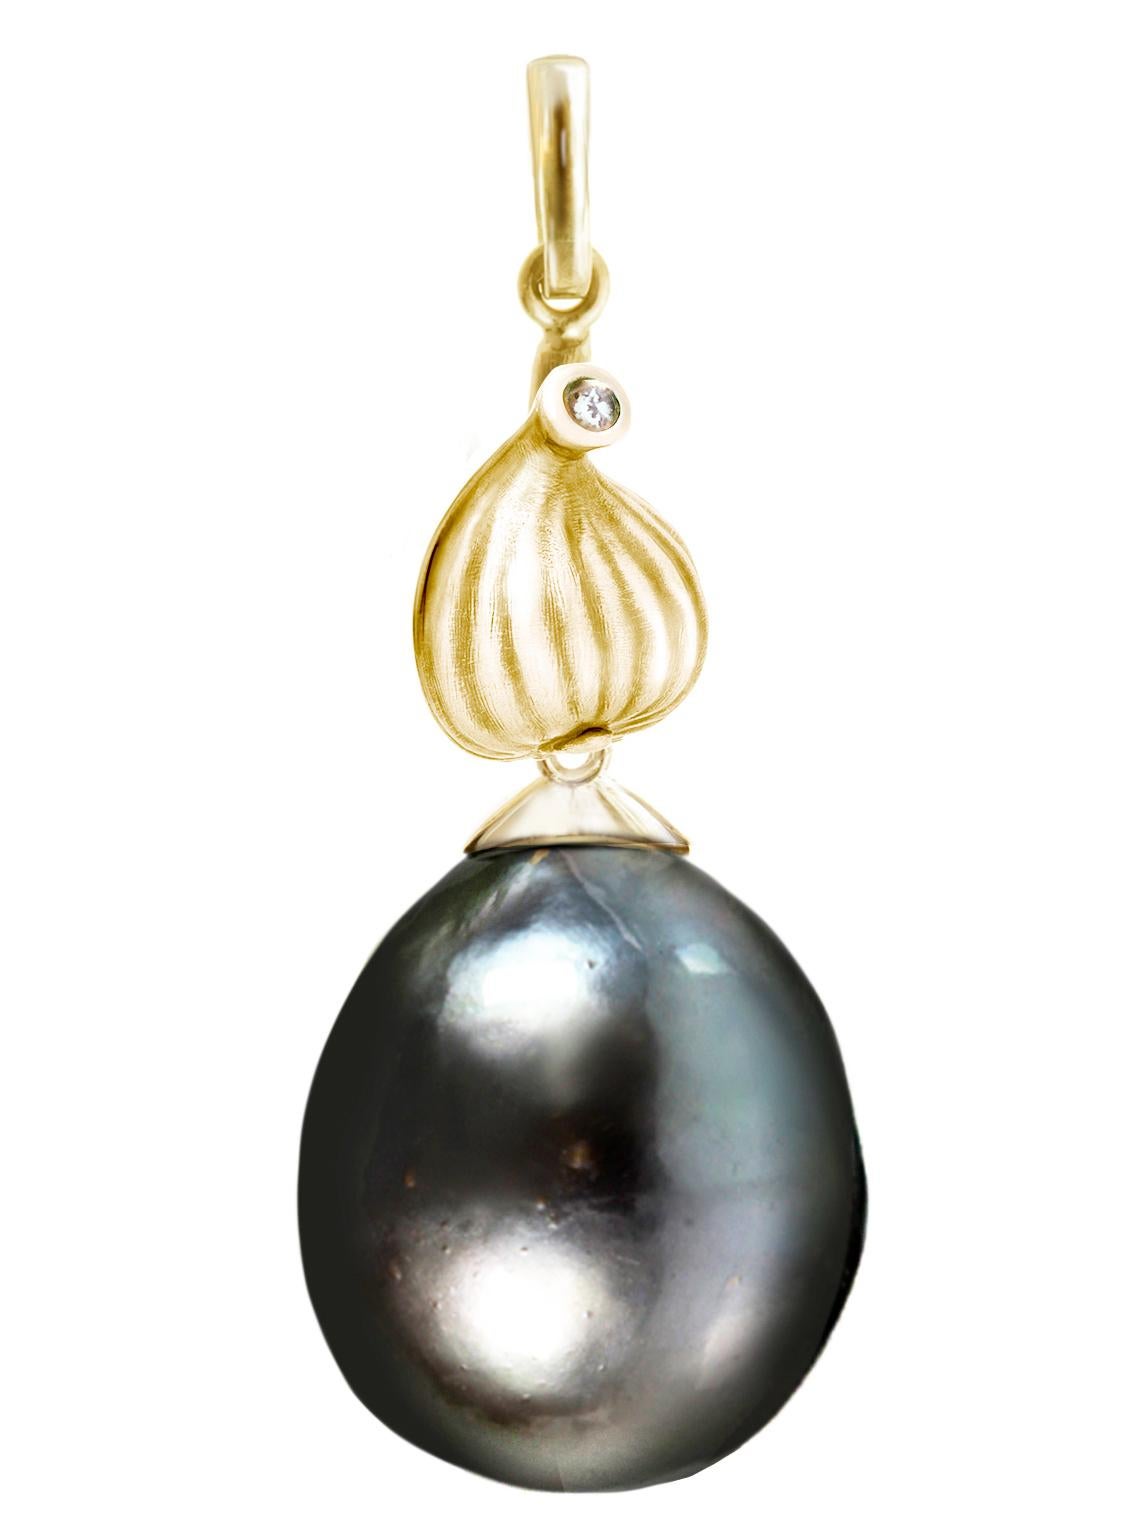 14 karat yellow gold Fig Fruits cocktail earrings with detachable 11 mm Tahitian cultured black pearls and two diamonds. These earrings by the artist were featured in Vogue UA review. We use top natural diamonds VS, F-G, we work with german gems